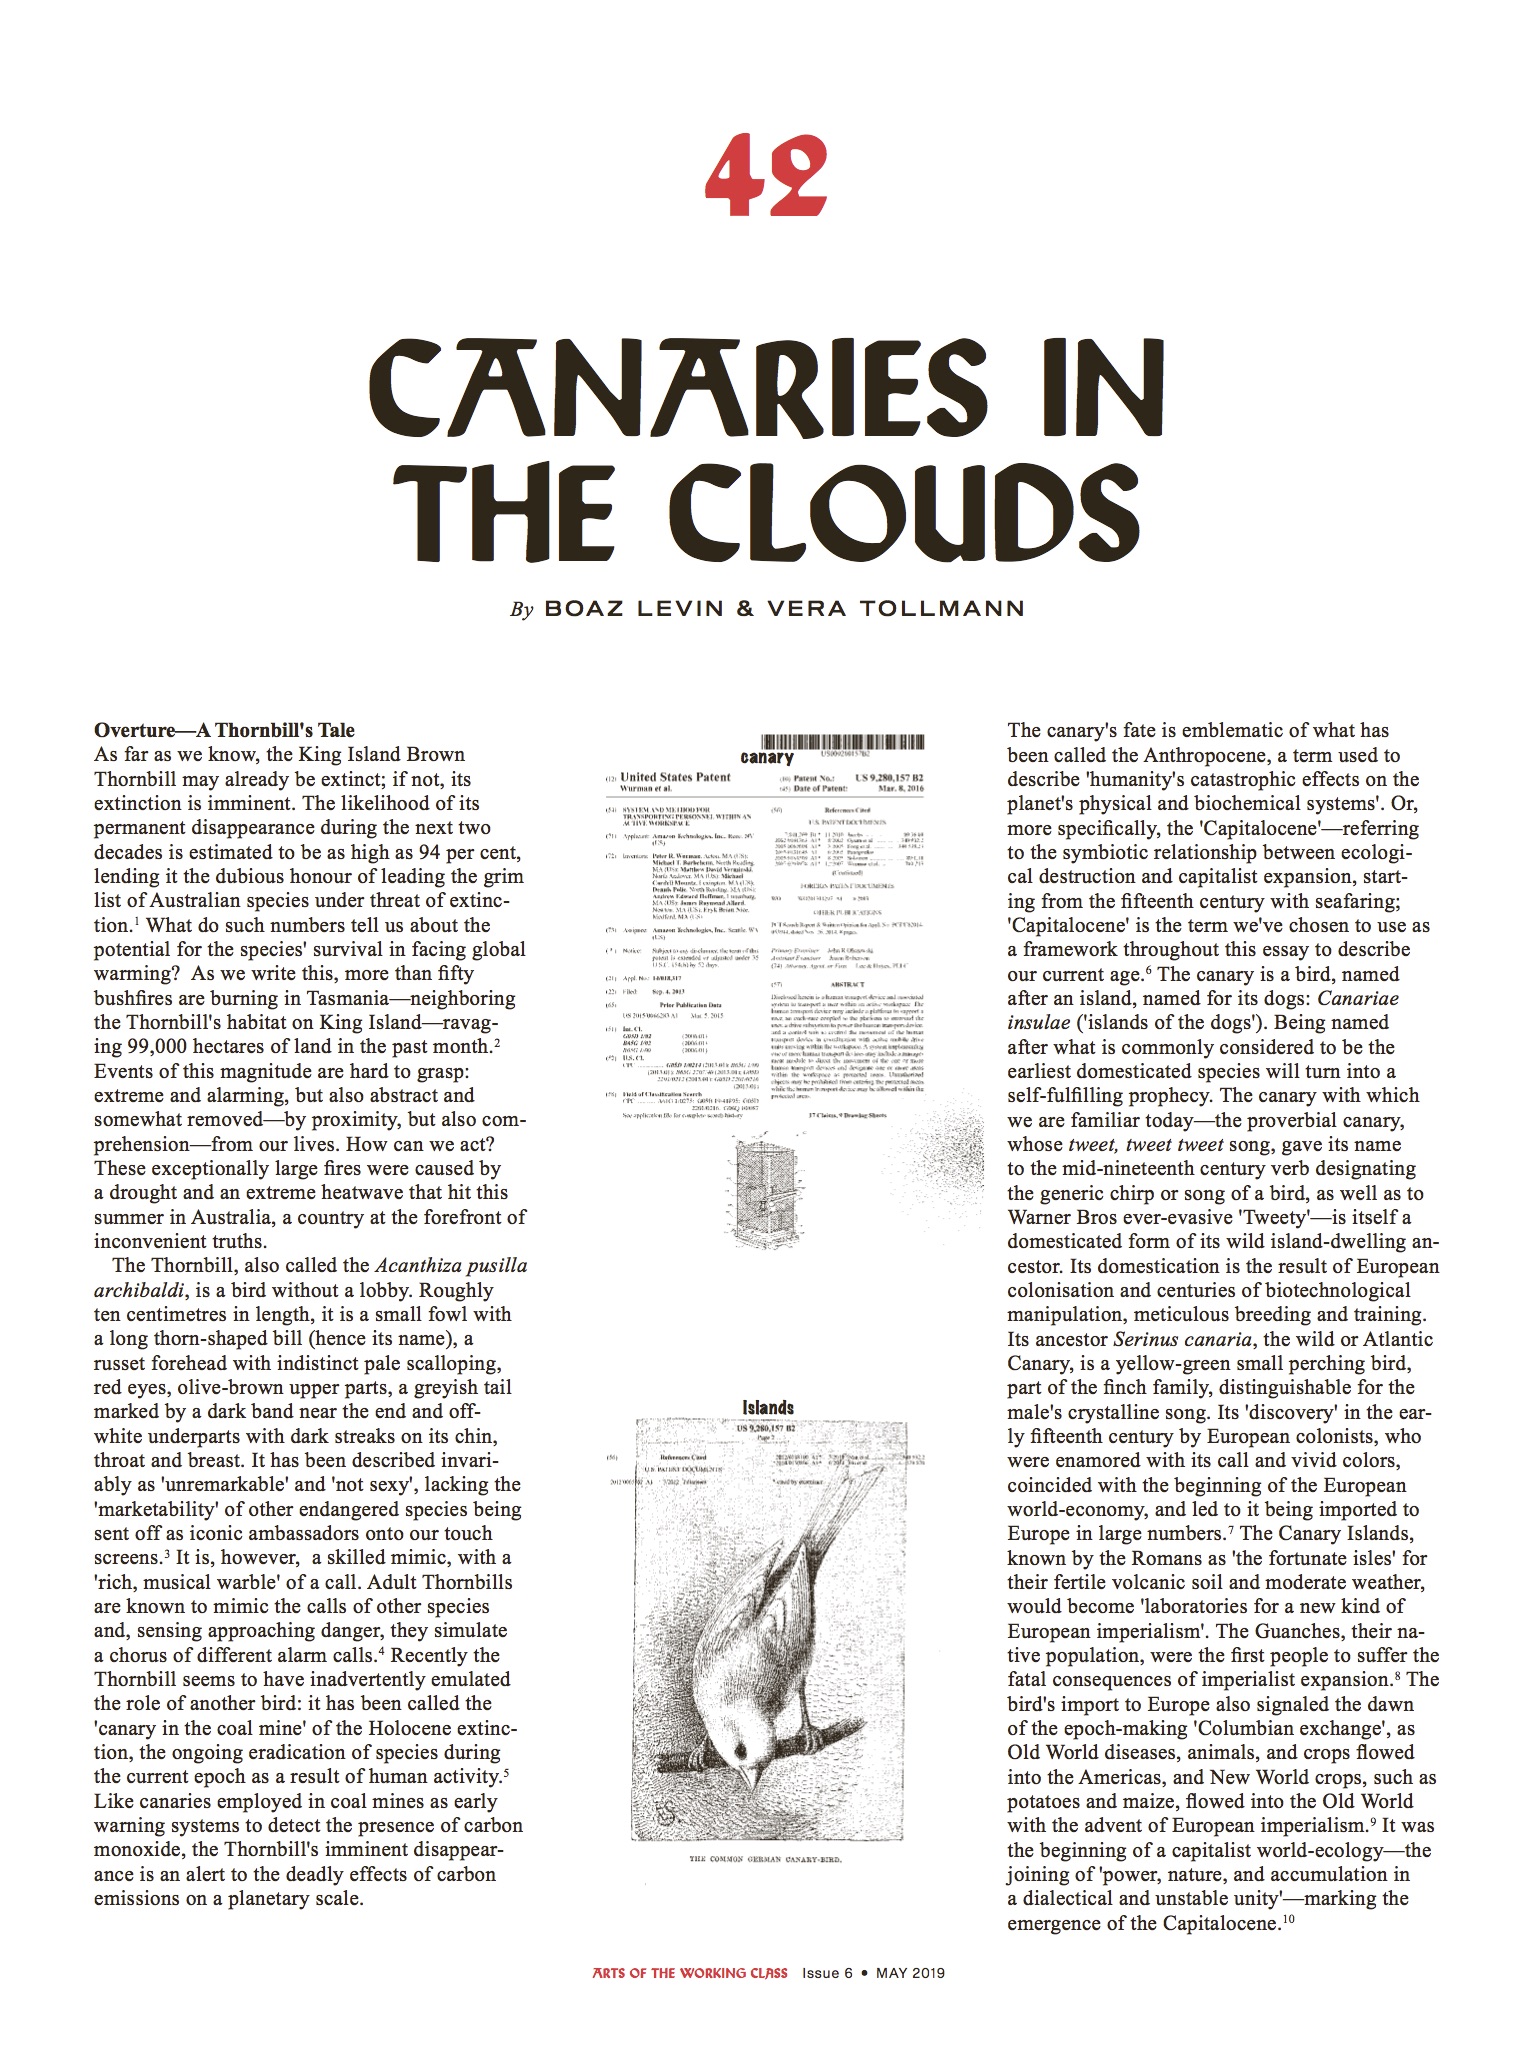 canaries_in_the_clouds_awc-1.jpg